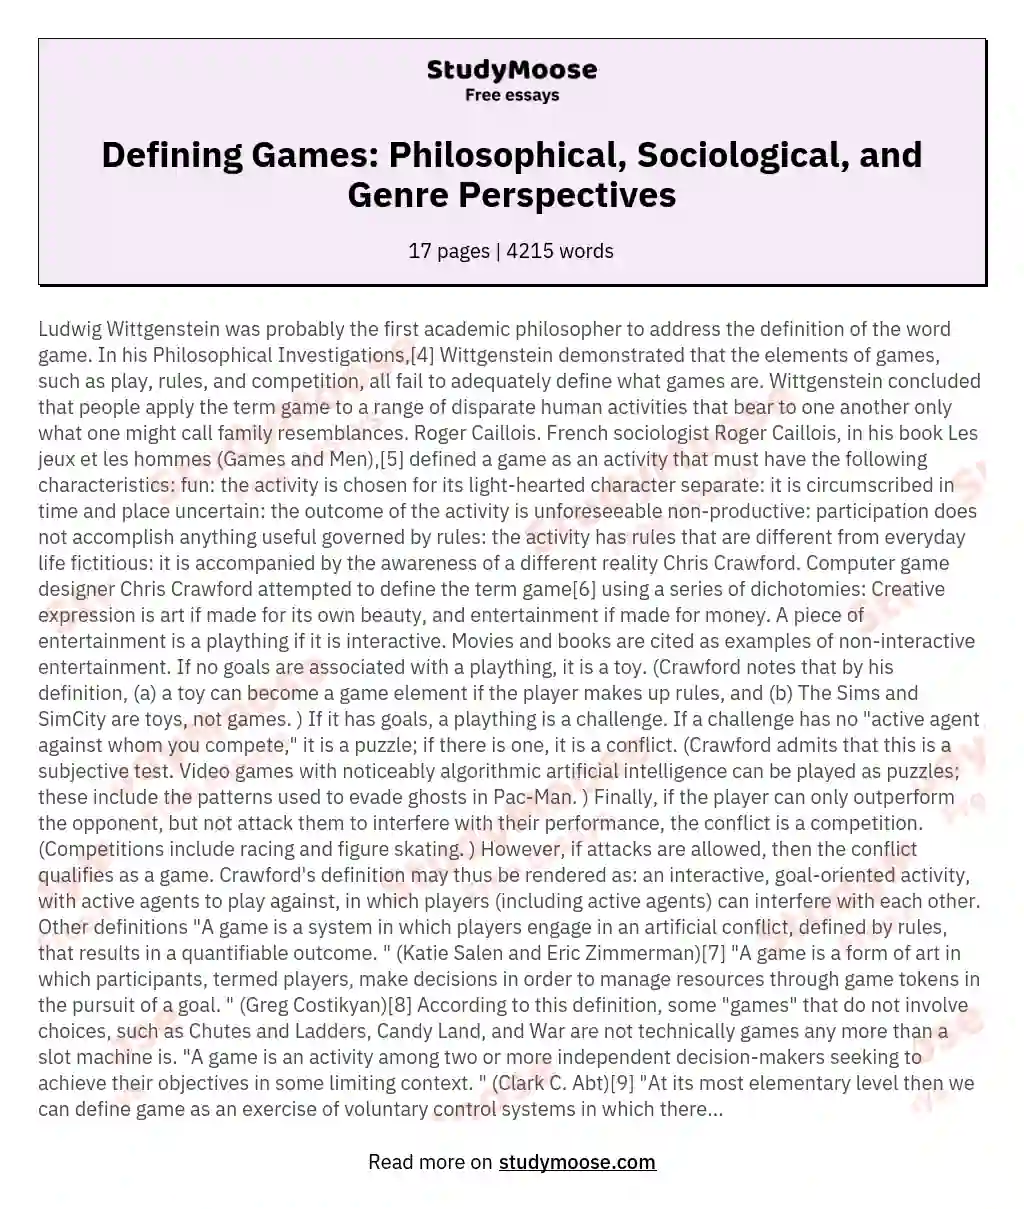 Defining Games: Philosophical, Sociological, and Genre Perspectives essay